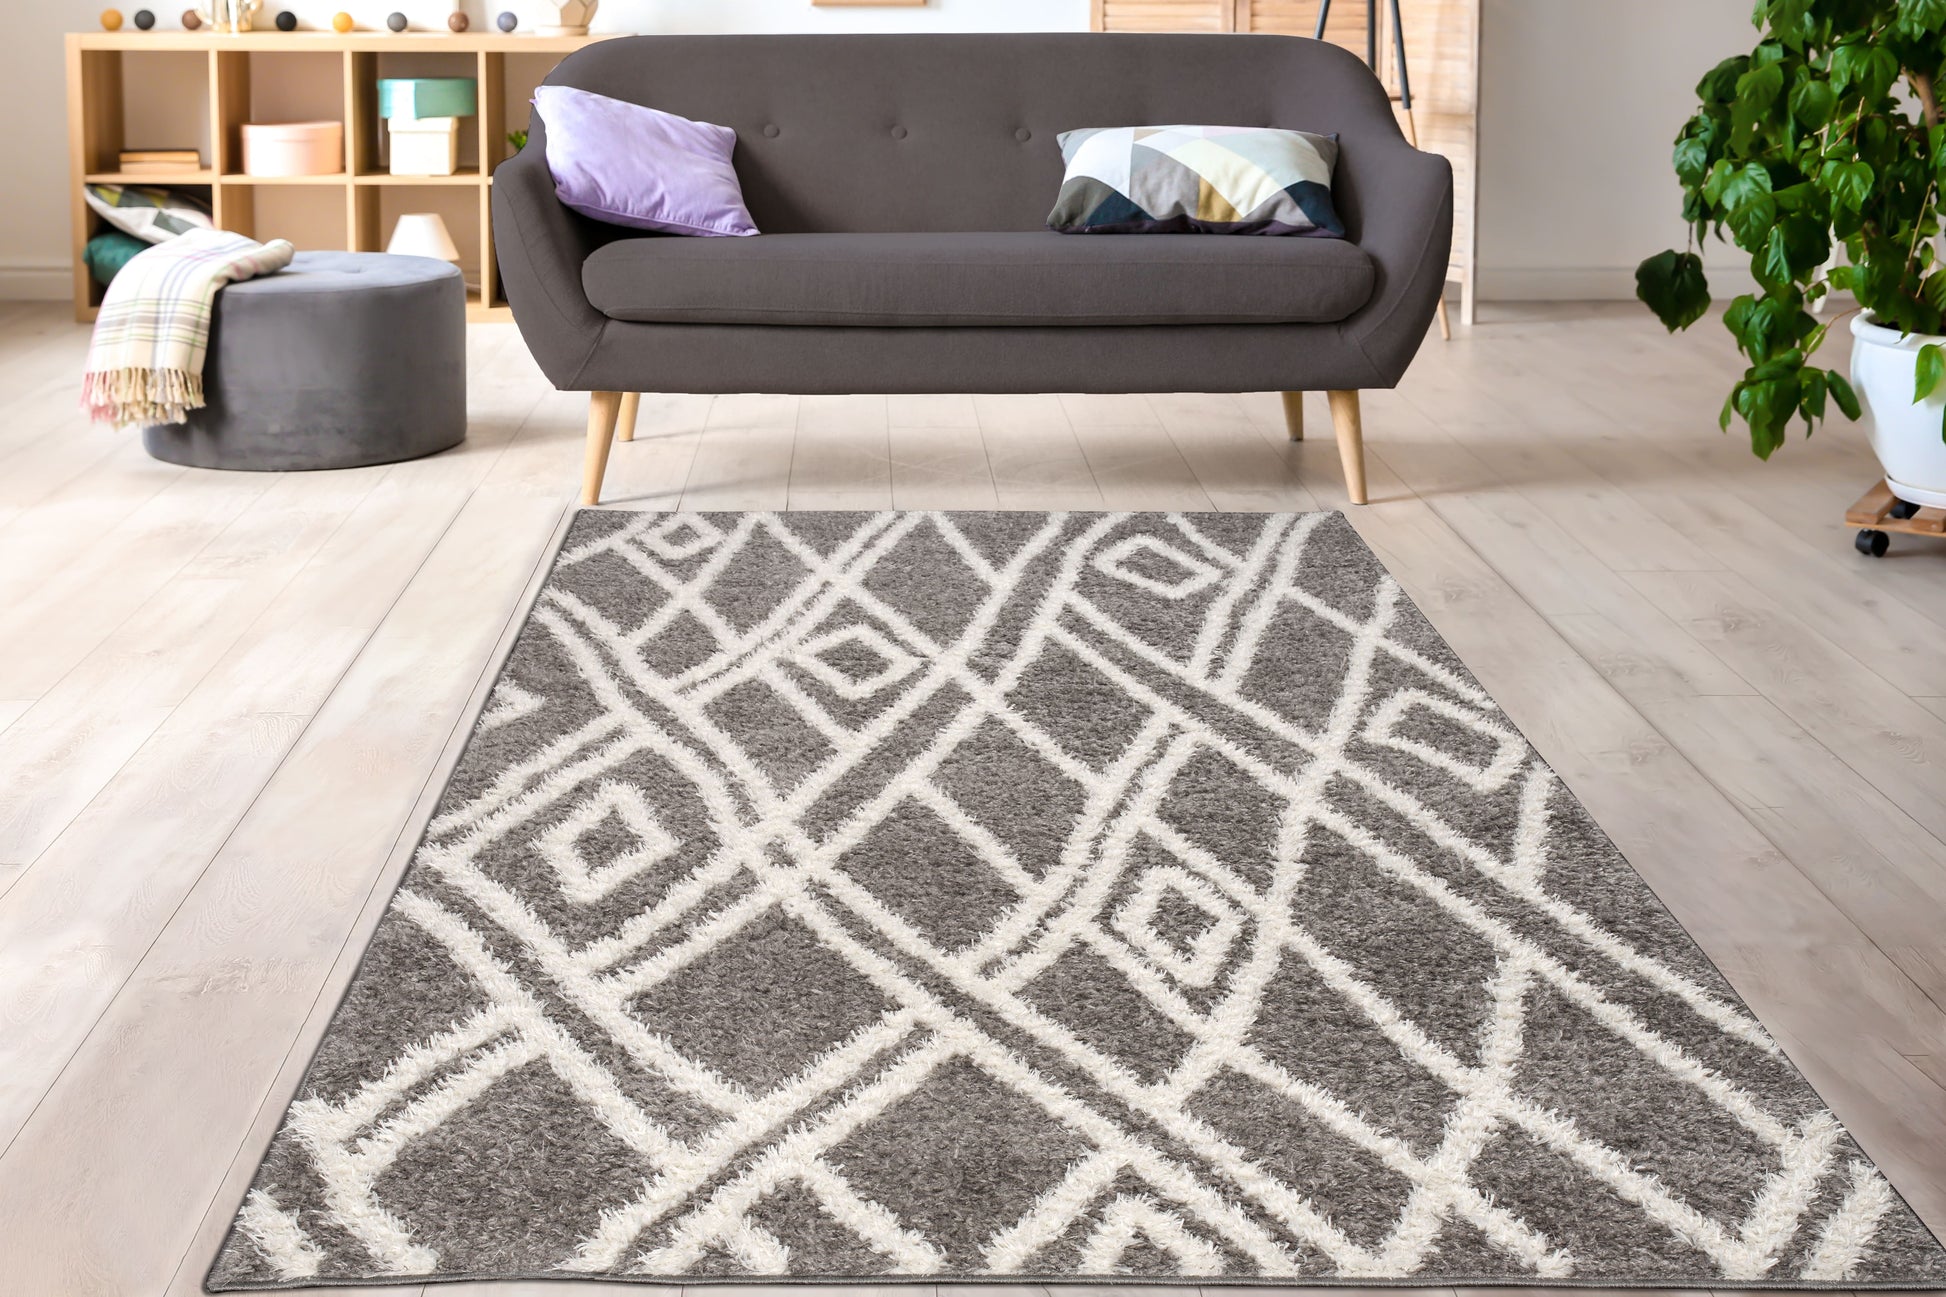 grey off white abstract fluffy shaggy area rug for living room bedroom 2x5, 3x5 Runner Rug, Entry Way, Entrance, Balcony, Bedside, Home Office, Table Top